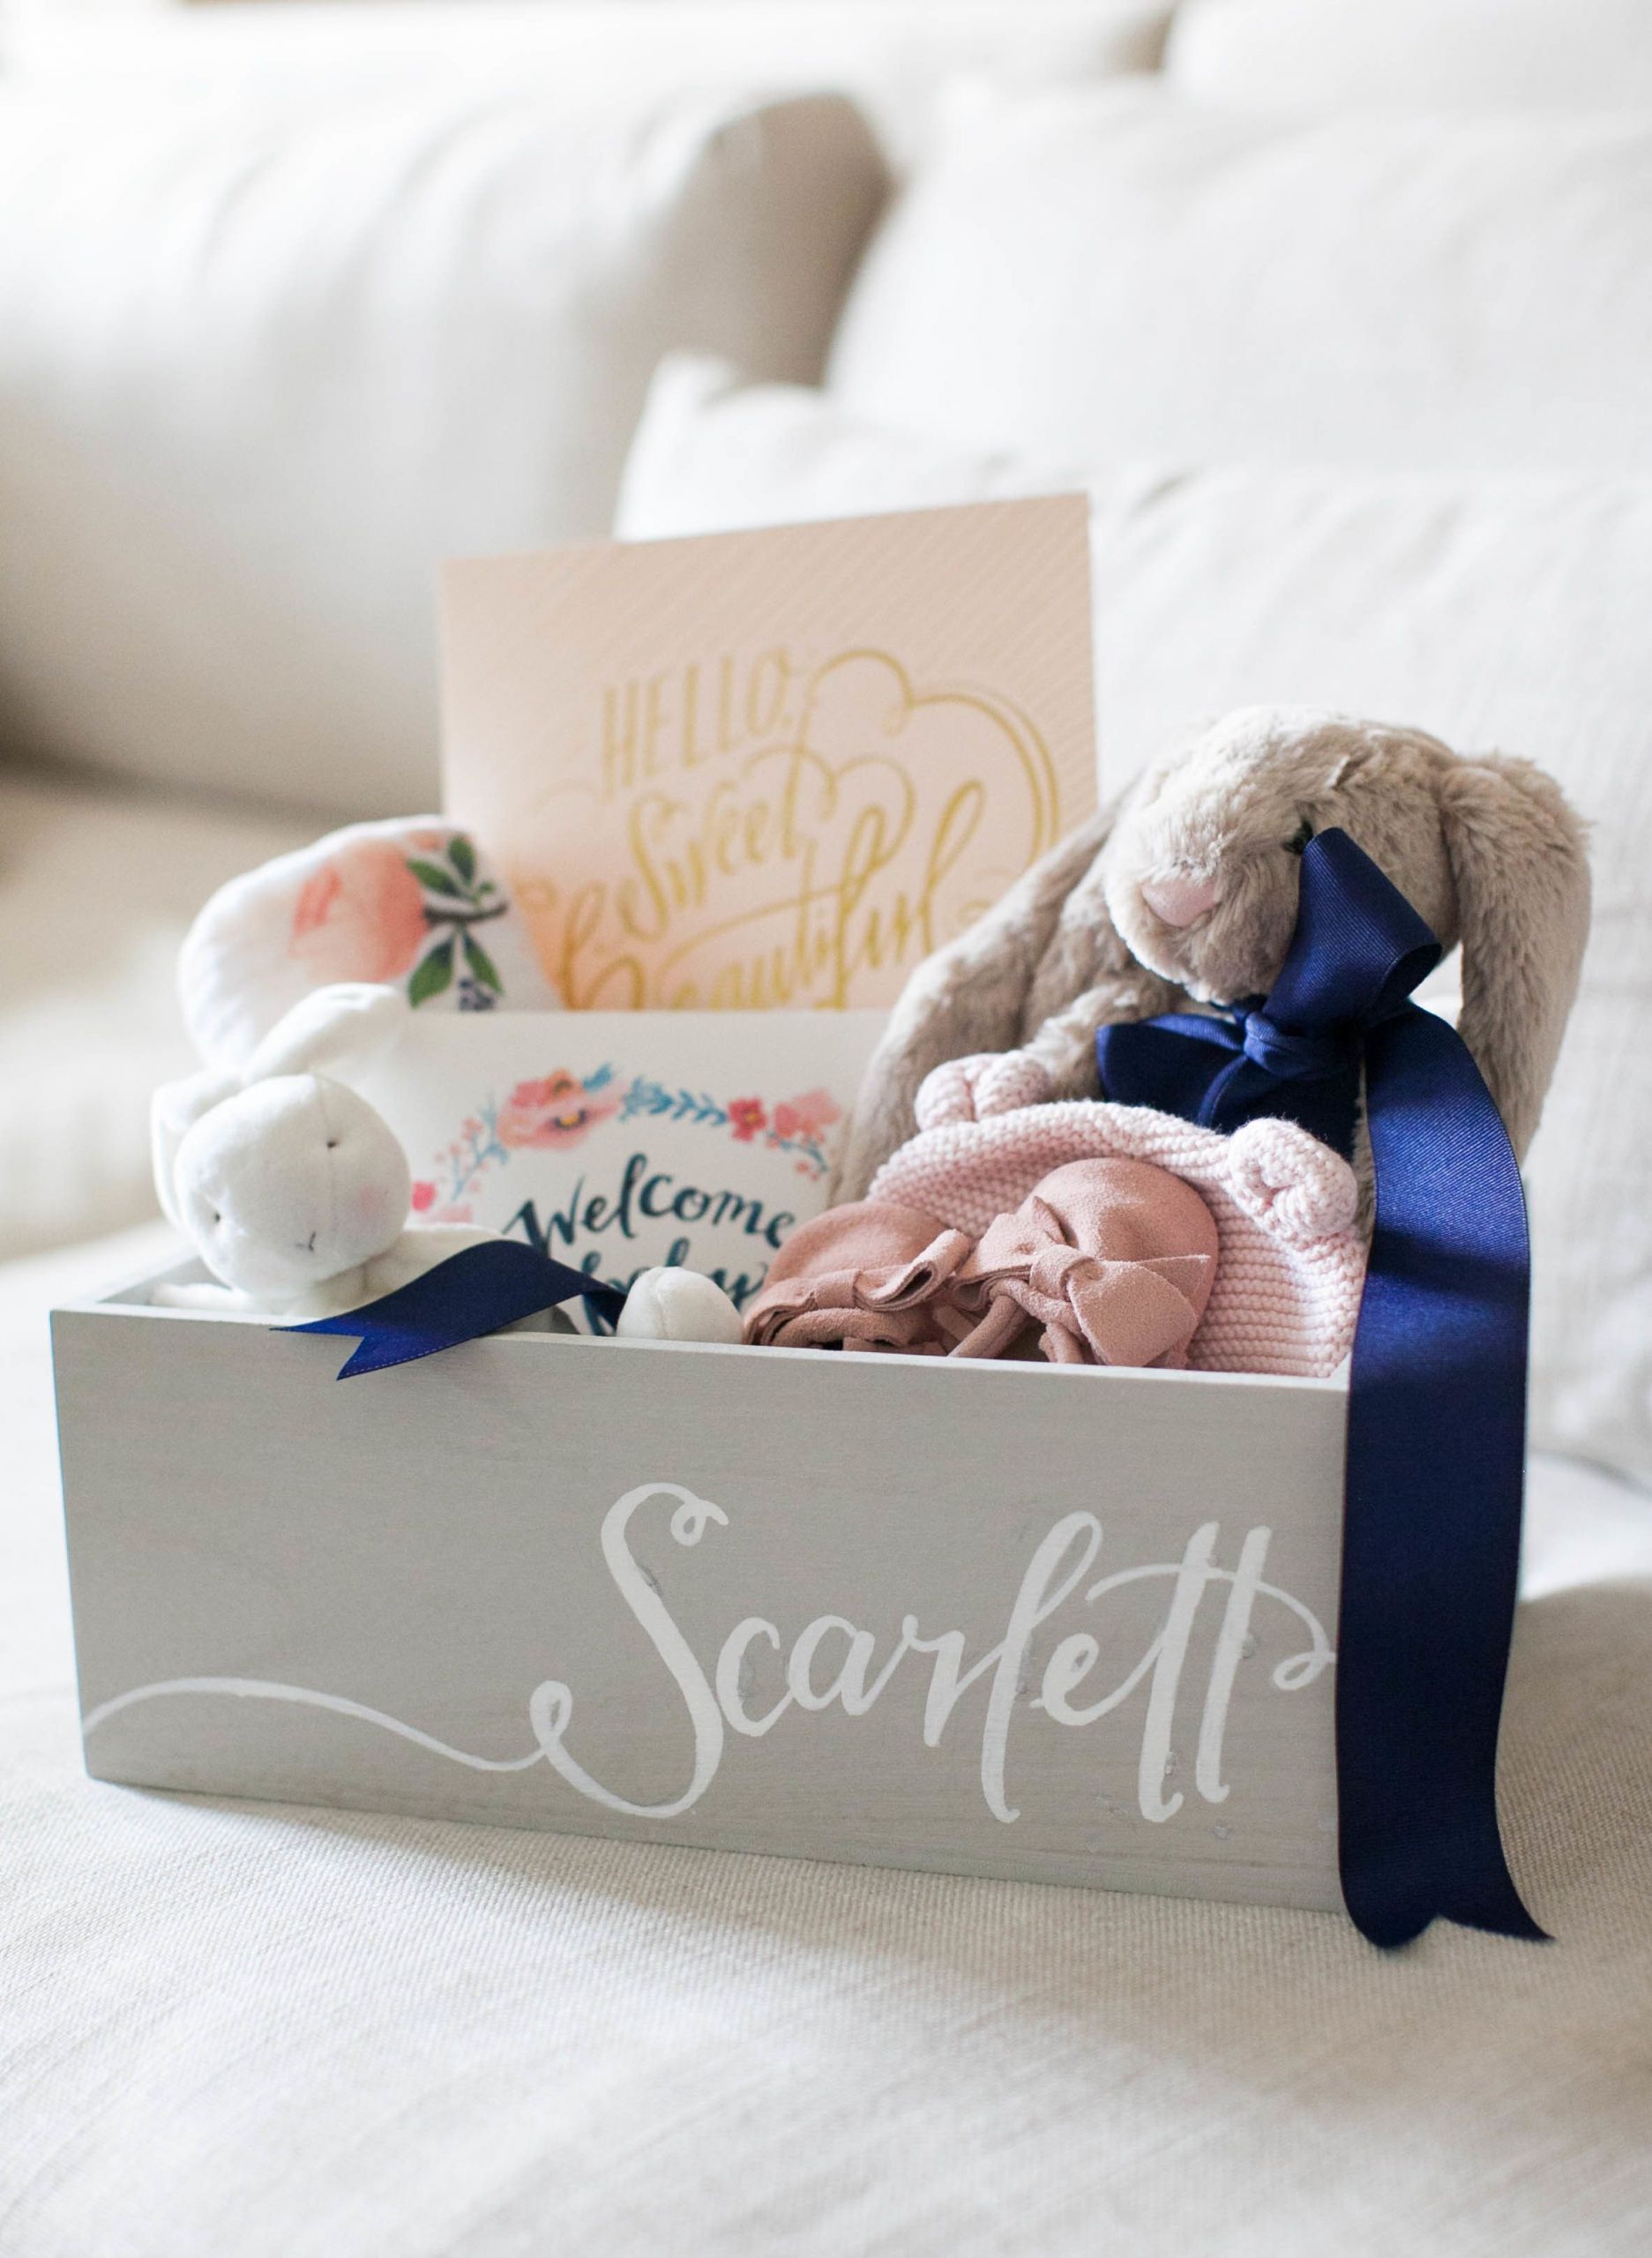 Www Ideas For A Gift For Family For New Baby
 19 f the Registry Baby Shower Gifts the Parents to be